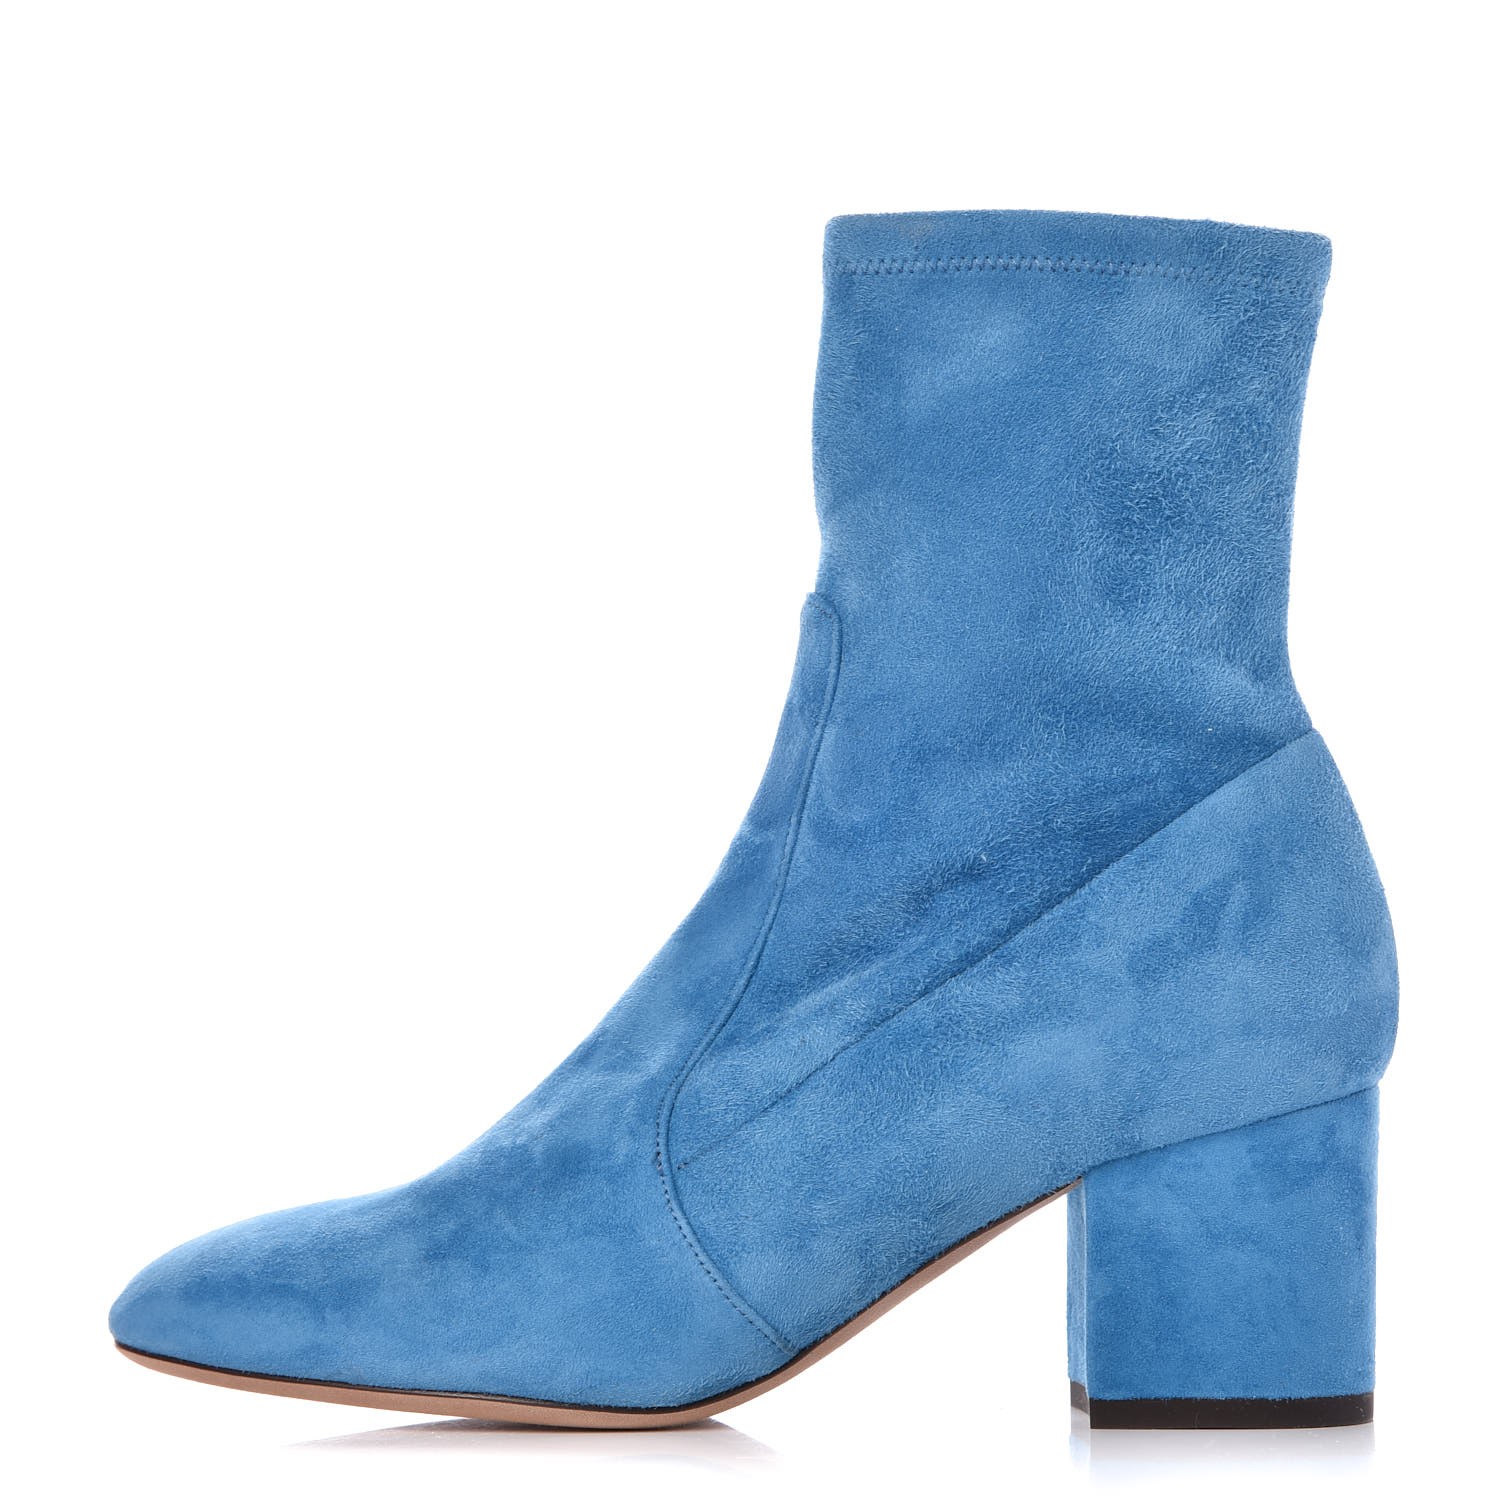 VALENTINO Suede Ankle Boots 36 Light 